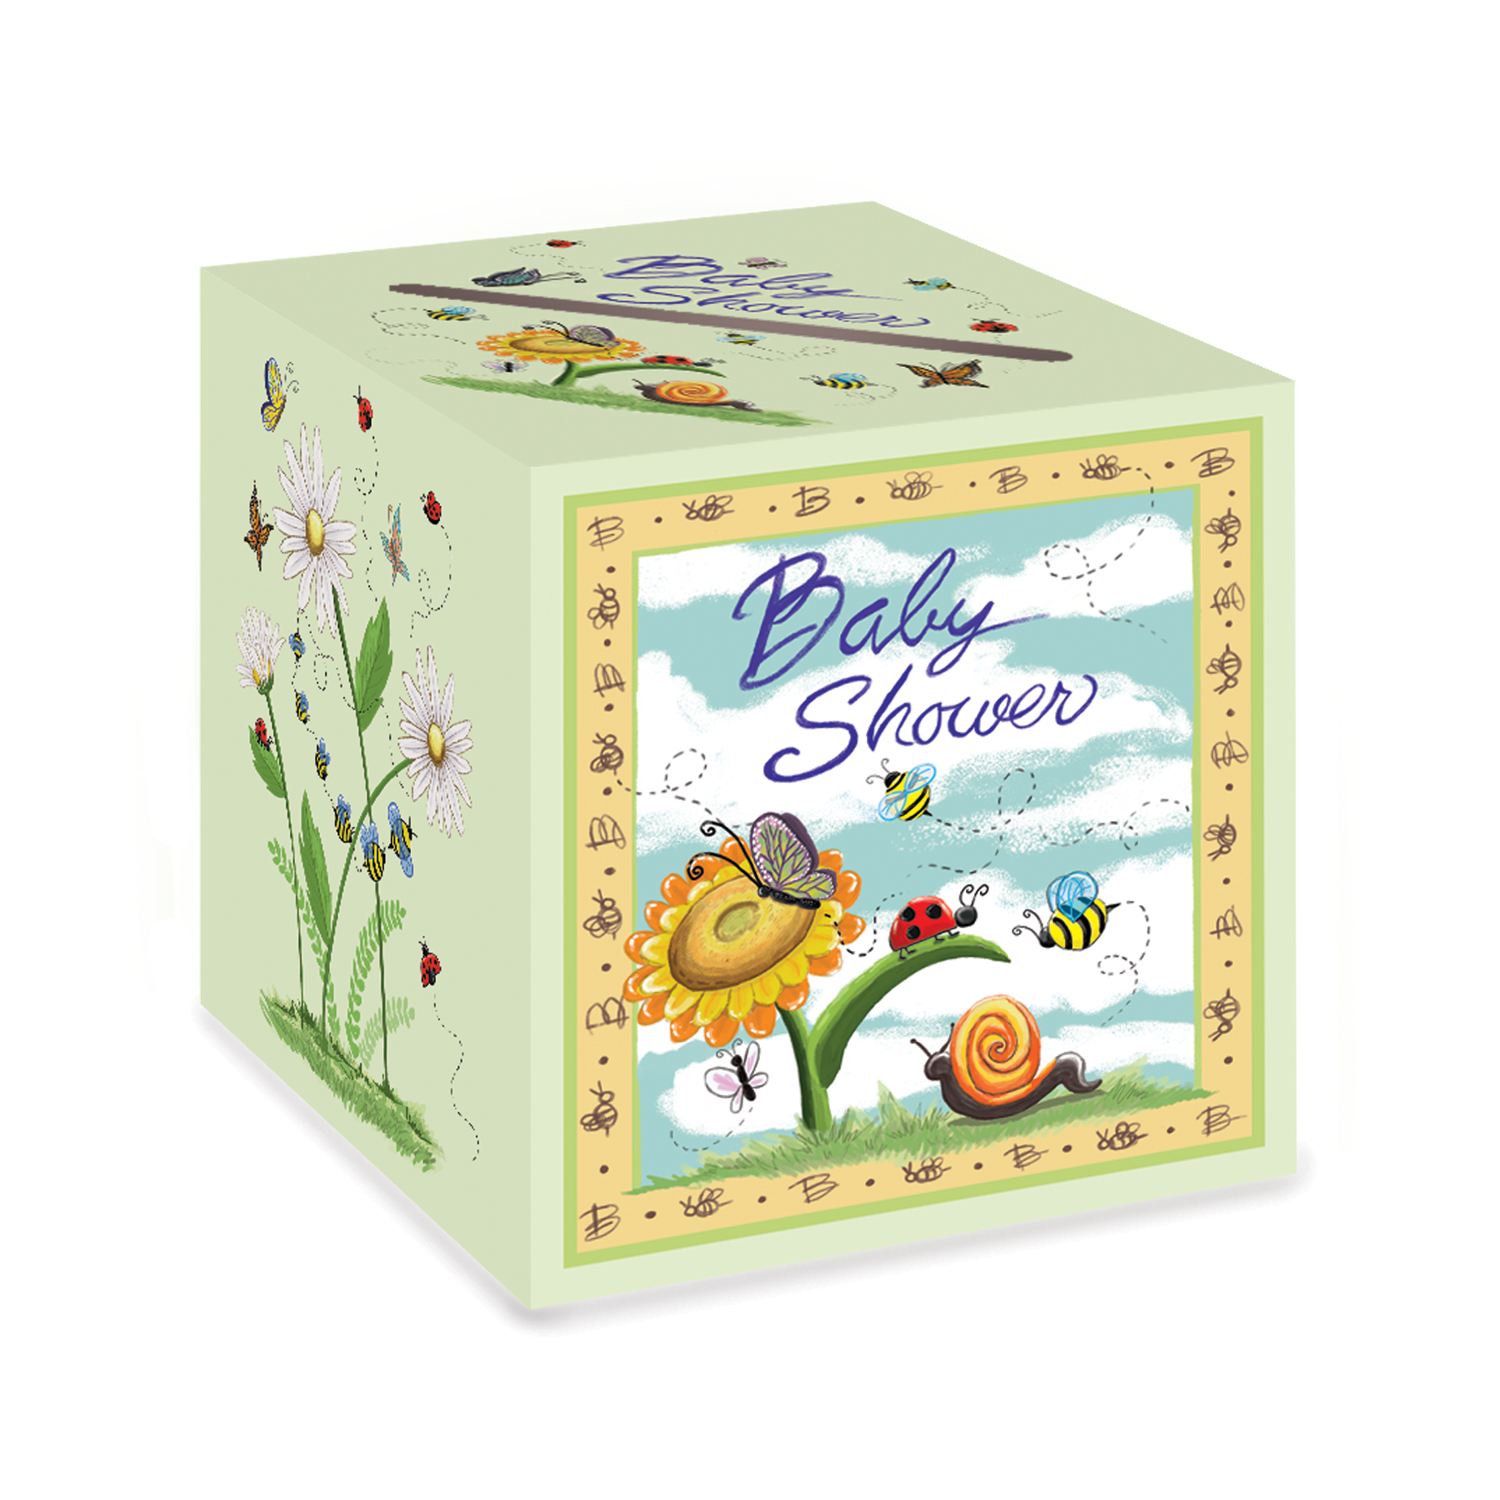 6 Pieces of Baby Shower Card Box Assembly Required